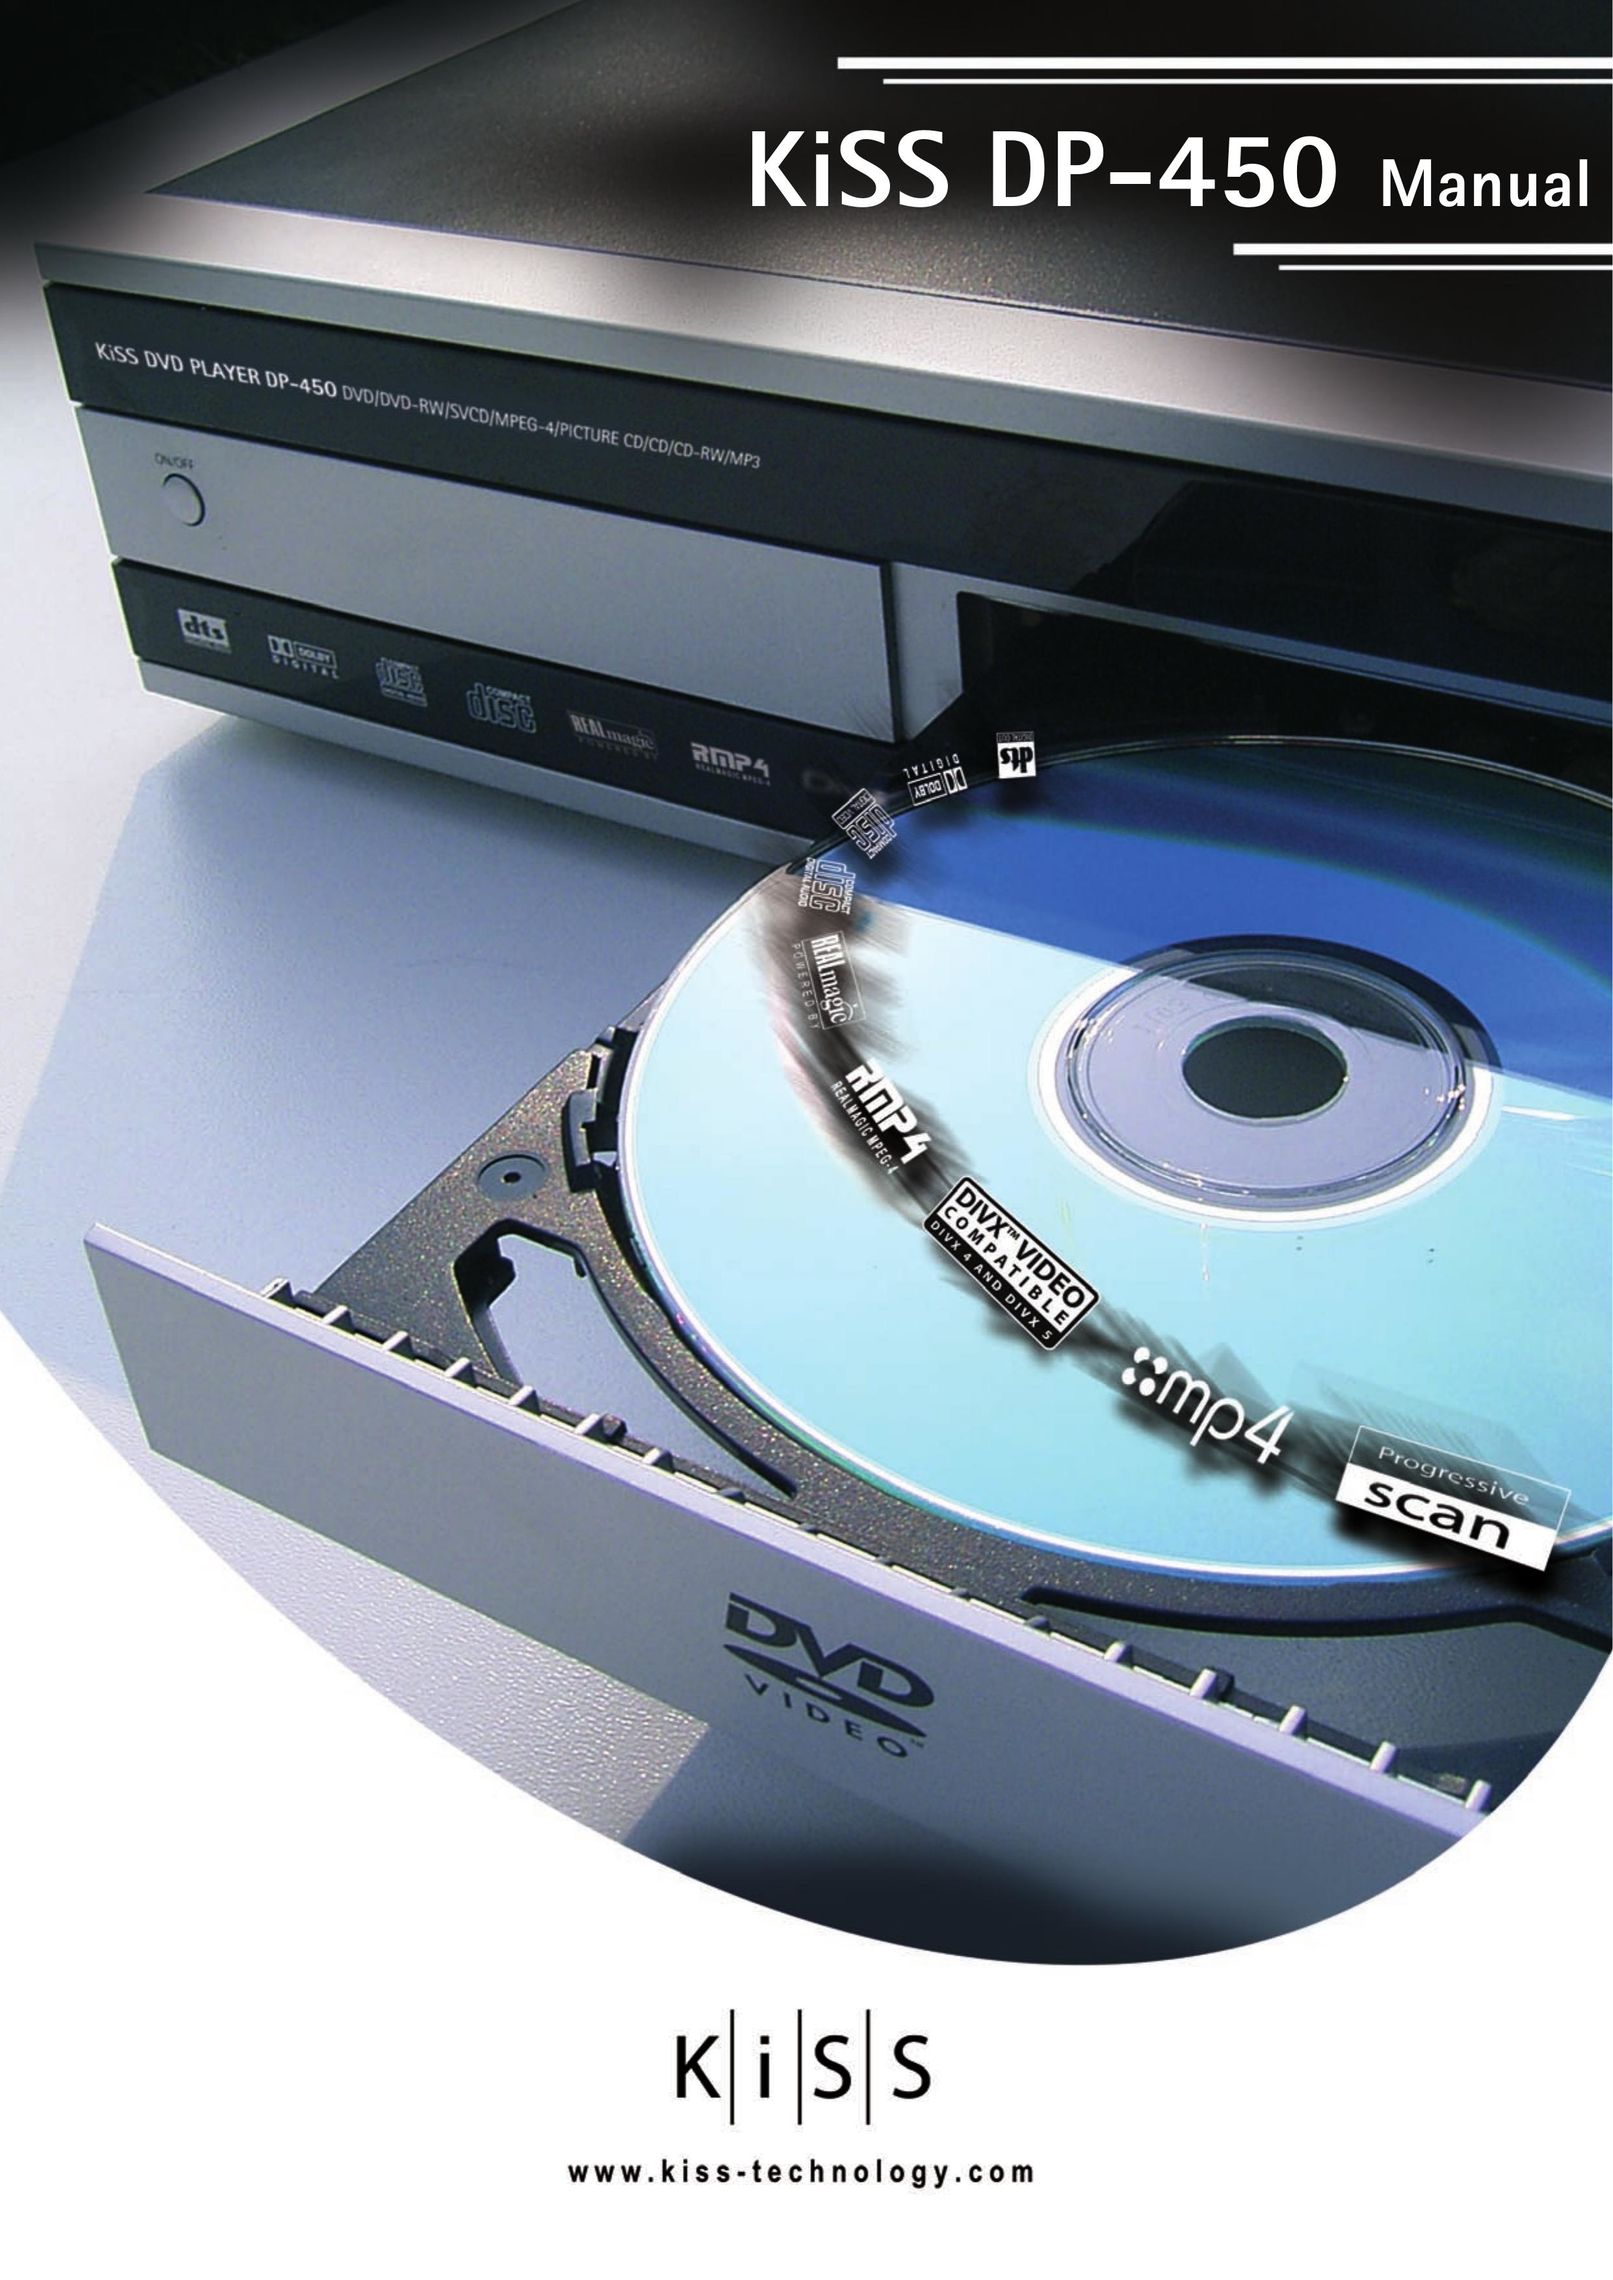 KiSS Networked Entertainment DP-450 DVD Player User Manual